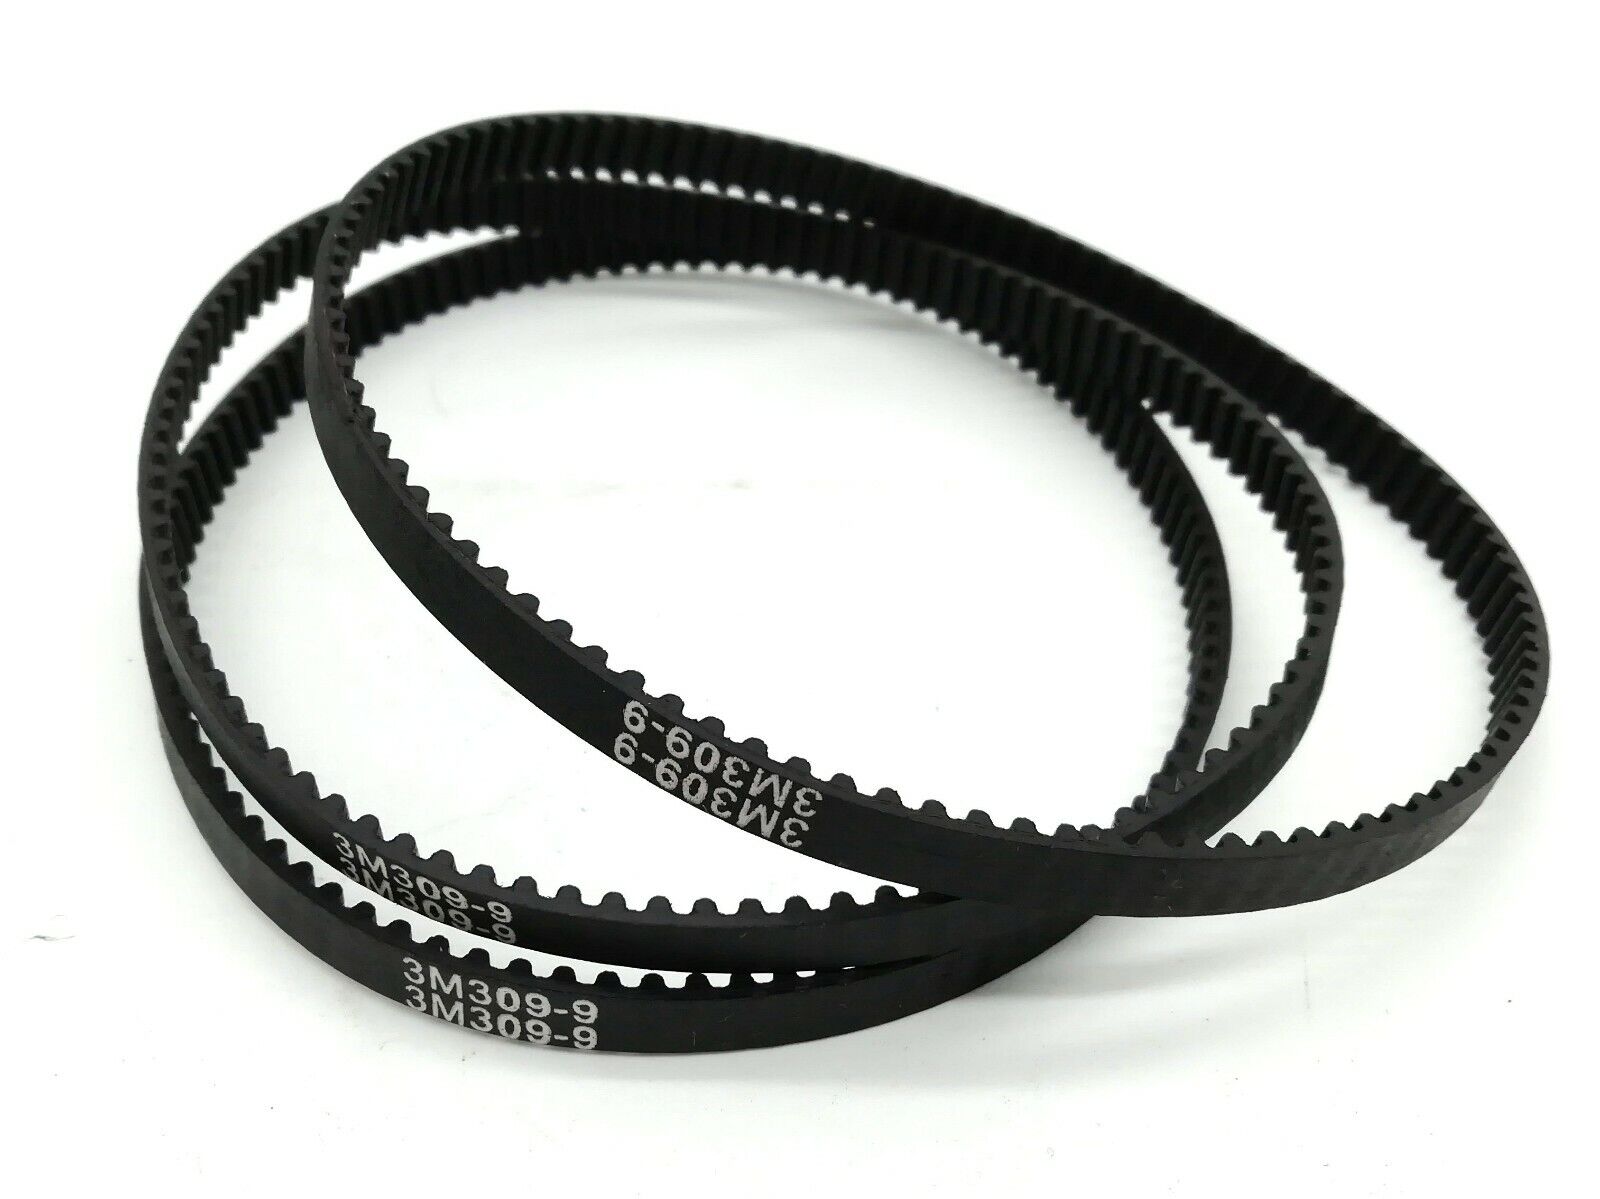 HTD 3M Timing belt Endless 309 Challenge the lowest price of Japan 315 or Length 9mm R Width New item 6 318mm